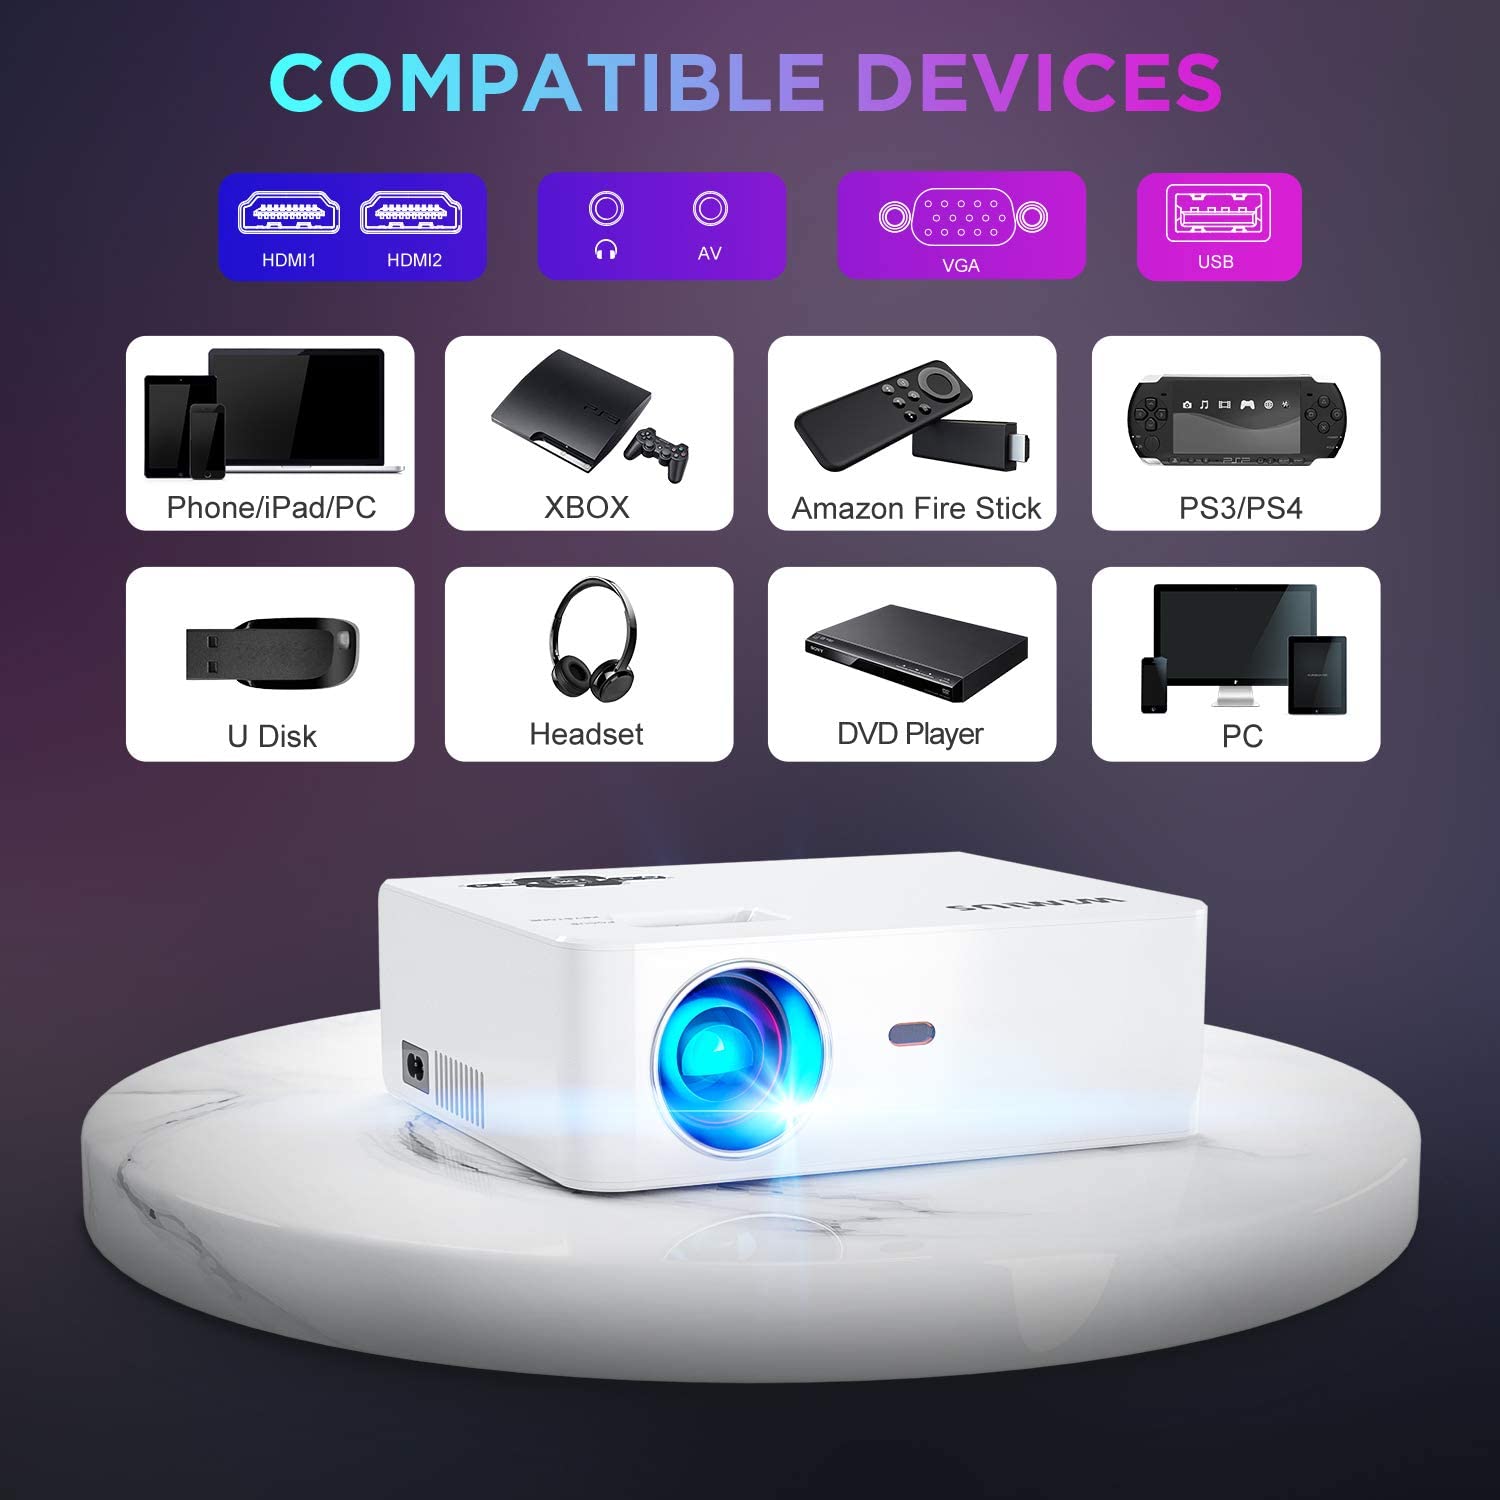 WiFi Projector, WiMiUS 6000 Lumens Mini Projector with Smart Phone Synchronize Support Full HD 1080P. - e4cents